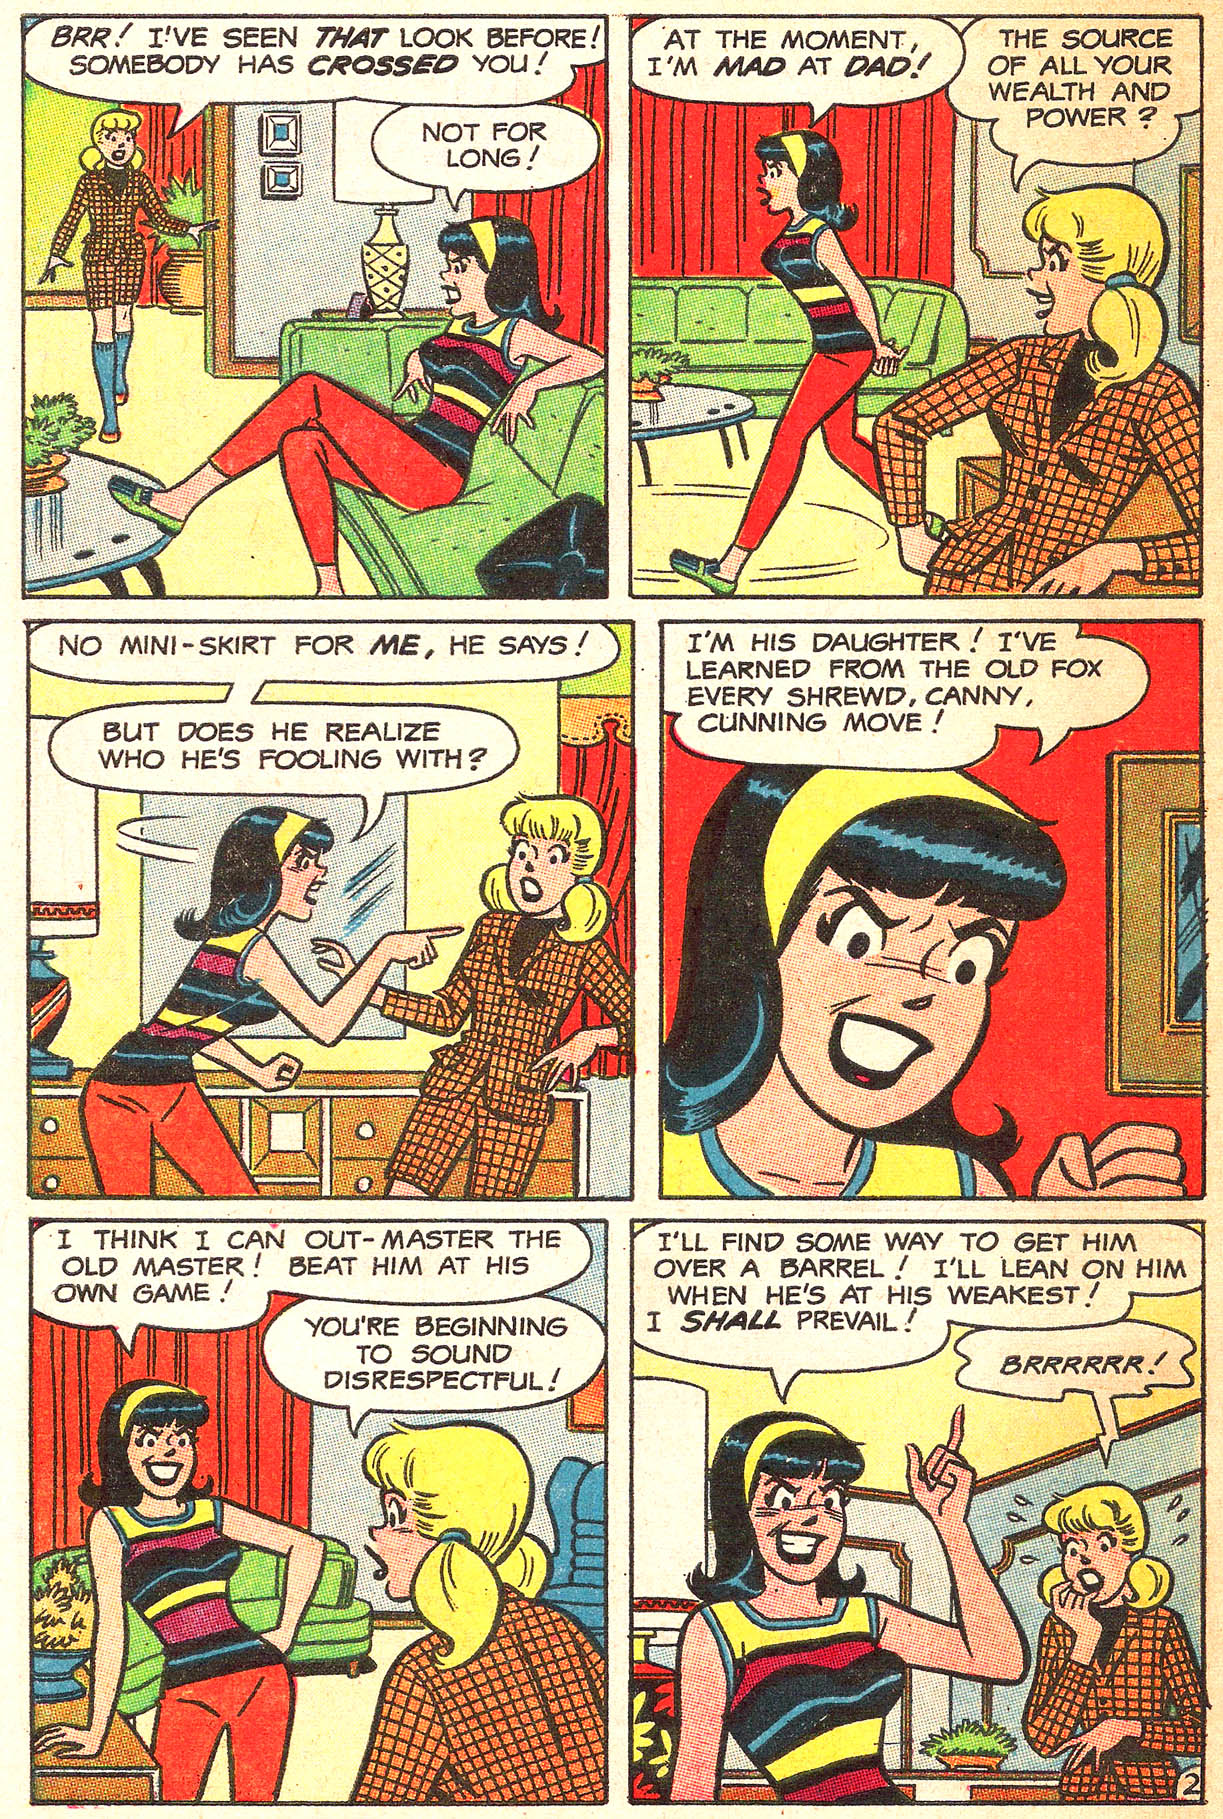 Read online Archie's Girls Betty and Veronica comic -  Issue #141 - 30